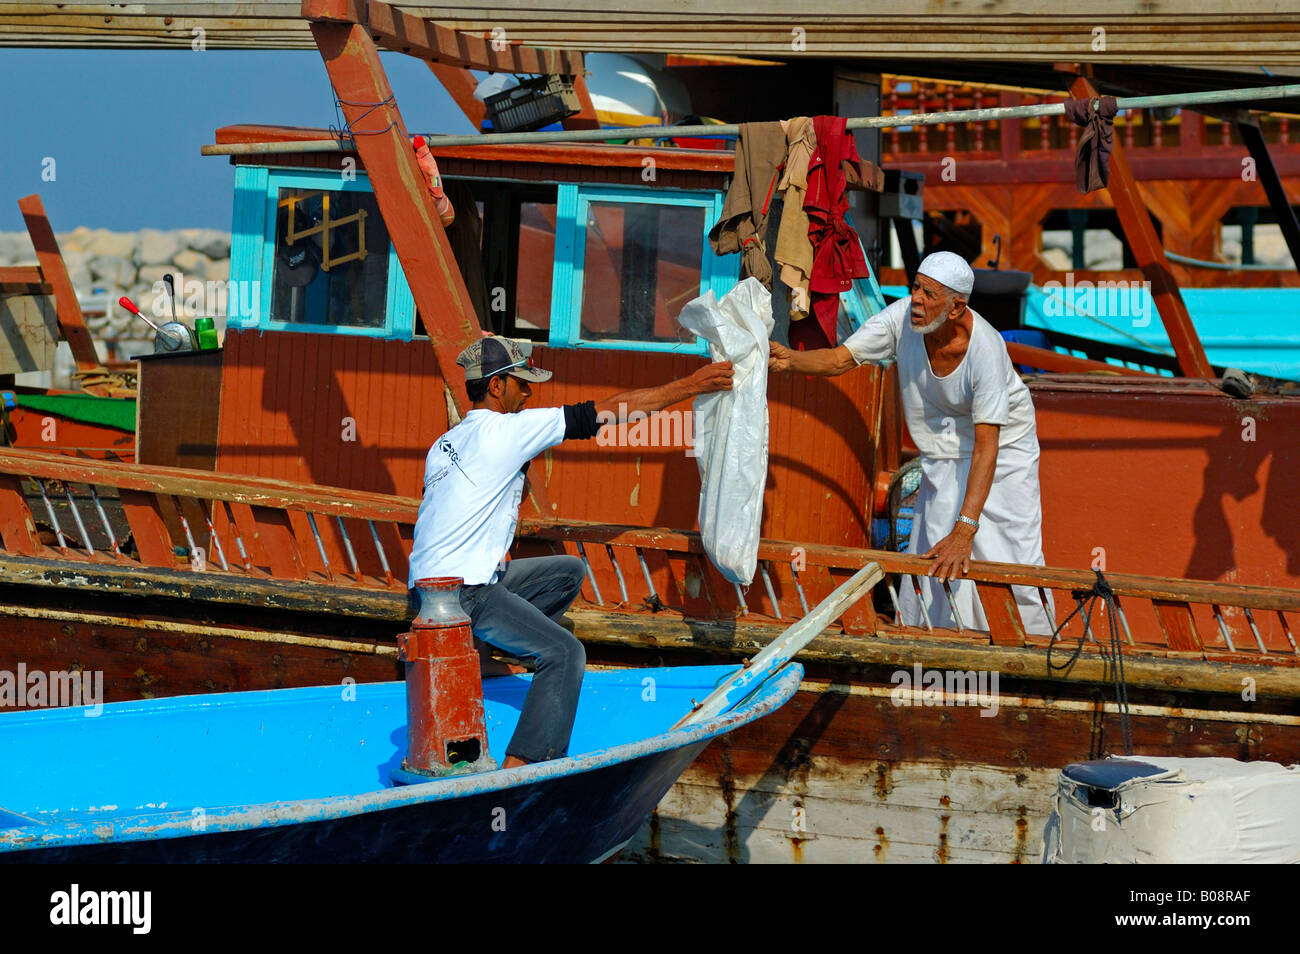 Boatsmen preparing to leave the harbour of Khasab, Musandam, Oman, Middle East Stock Photo